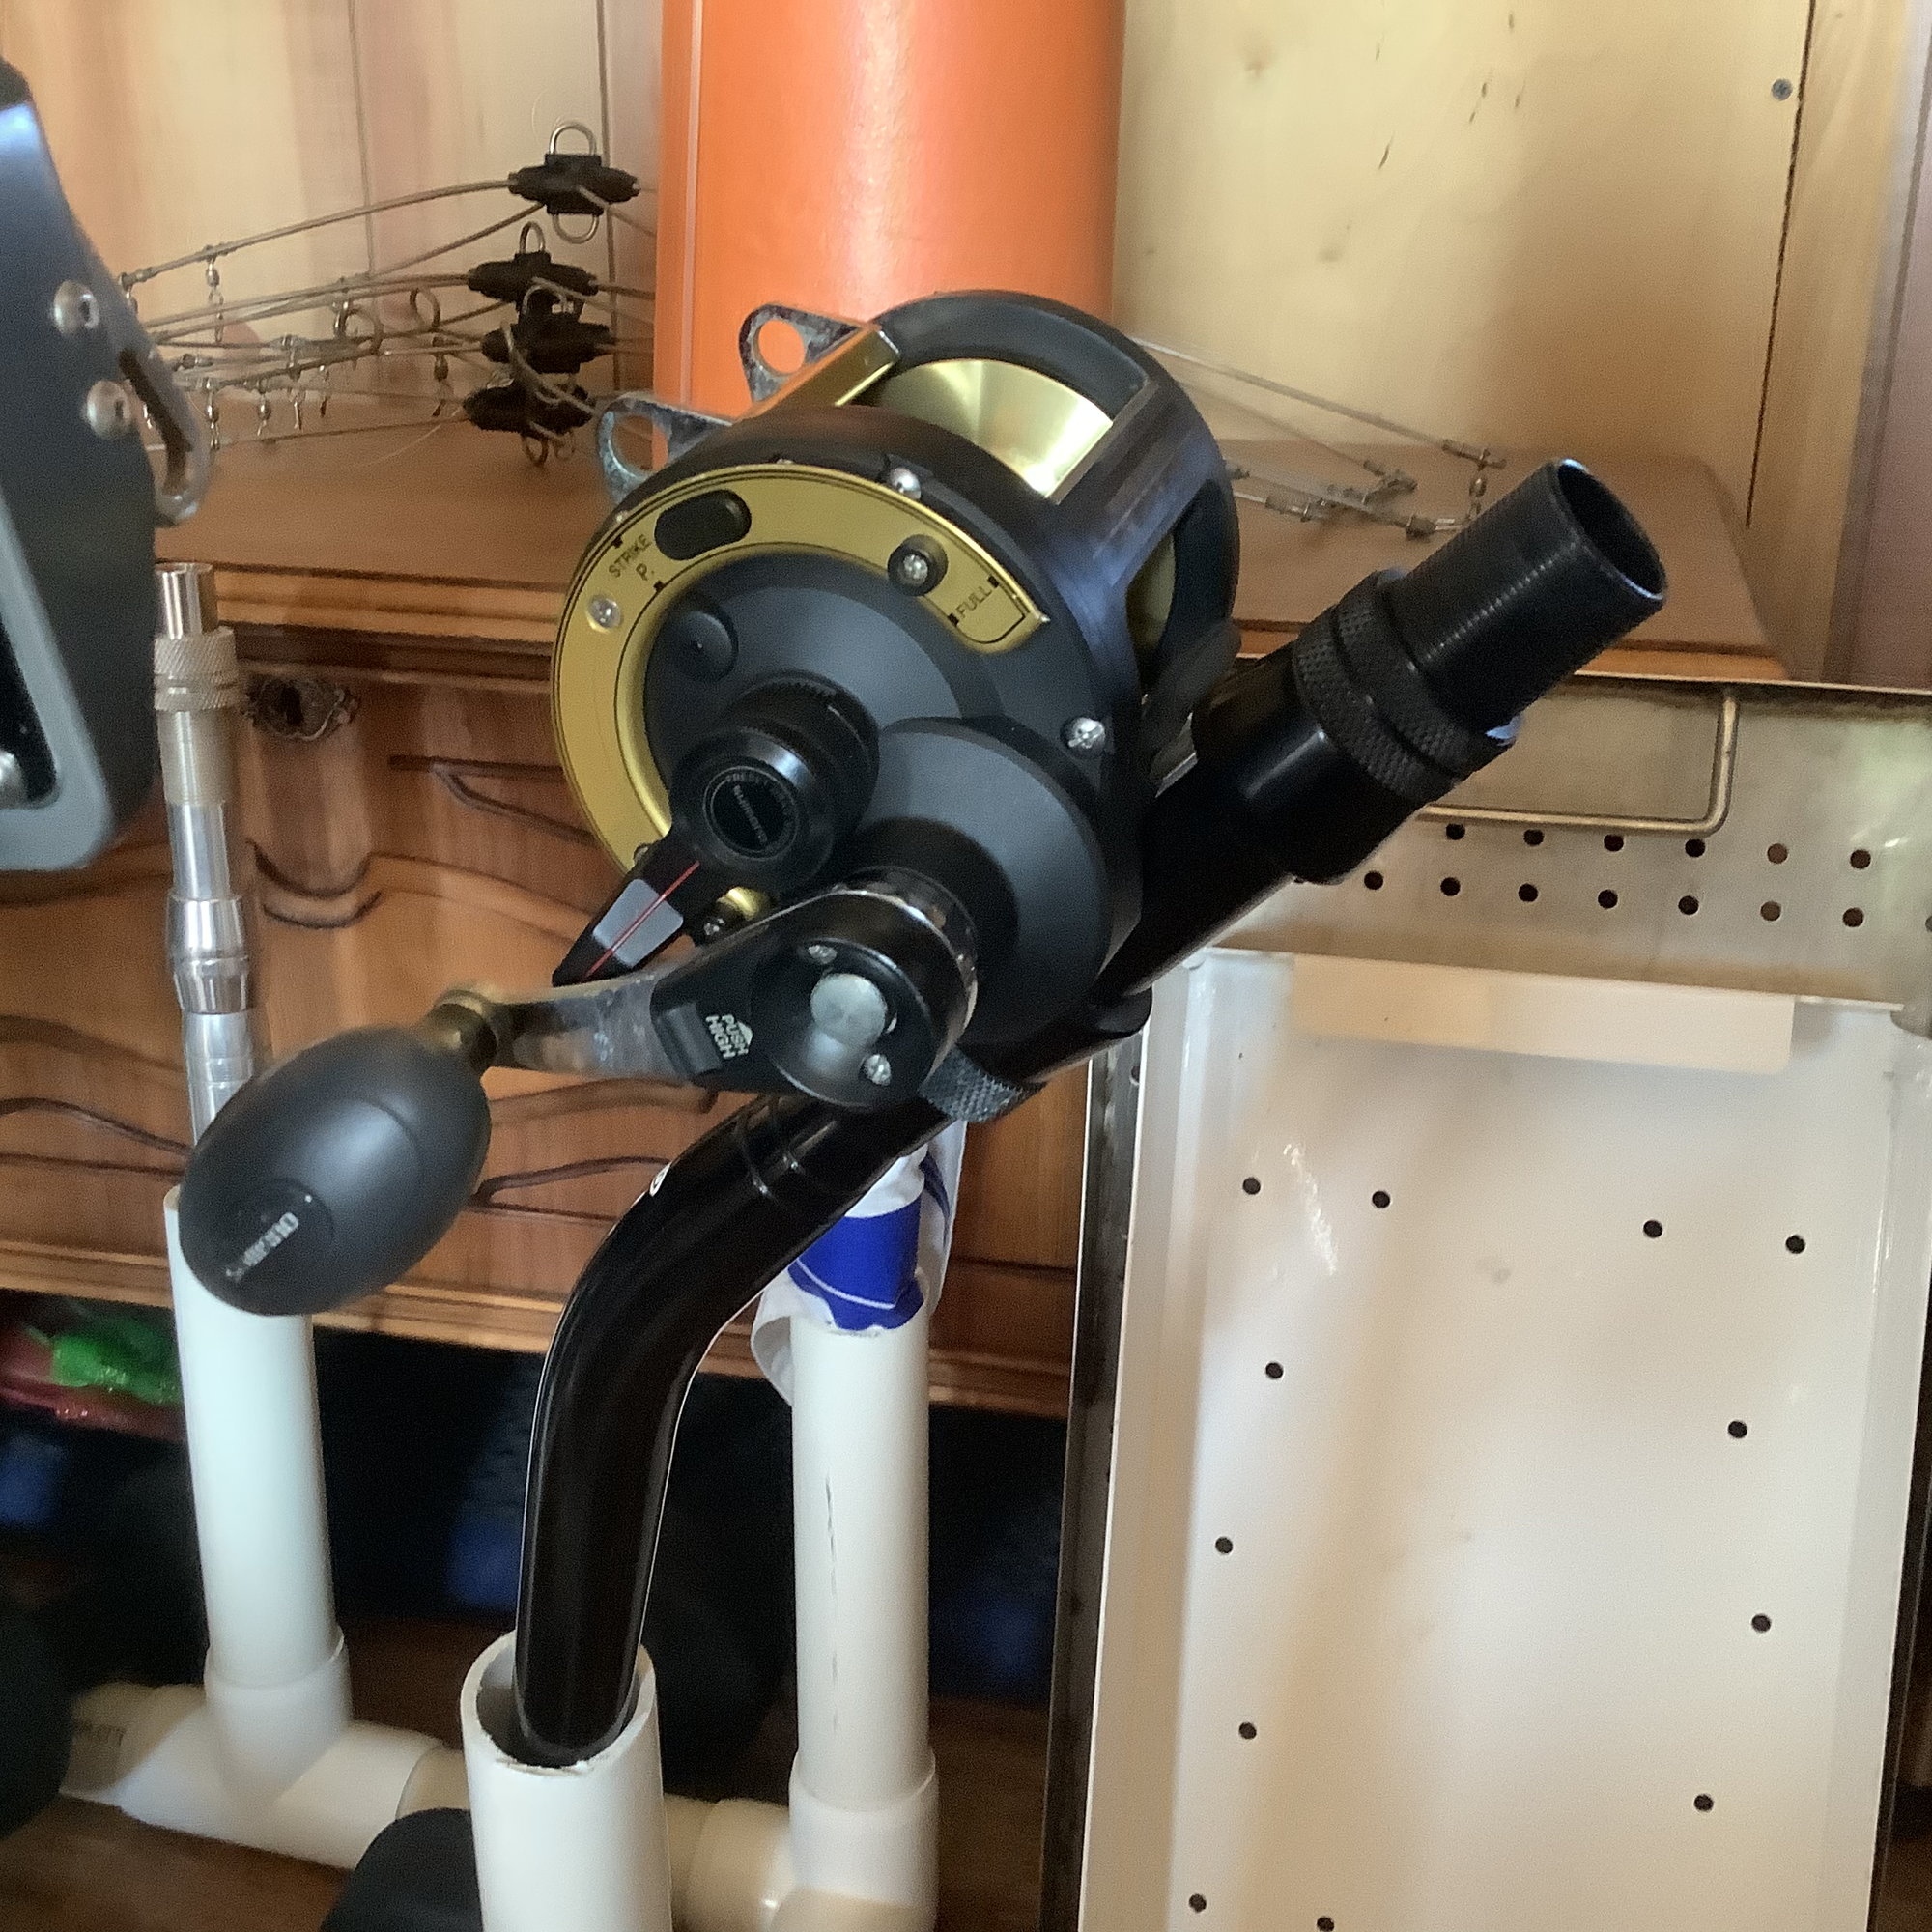 Who sells pipe mount teaser reels - The Hull Truth - Boating and Fishing  Forum